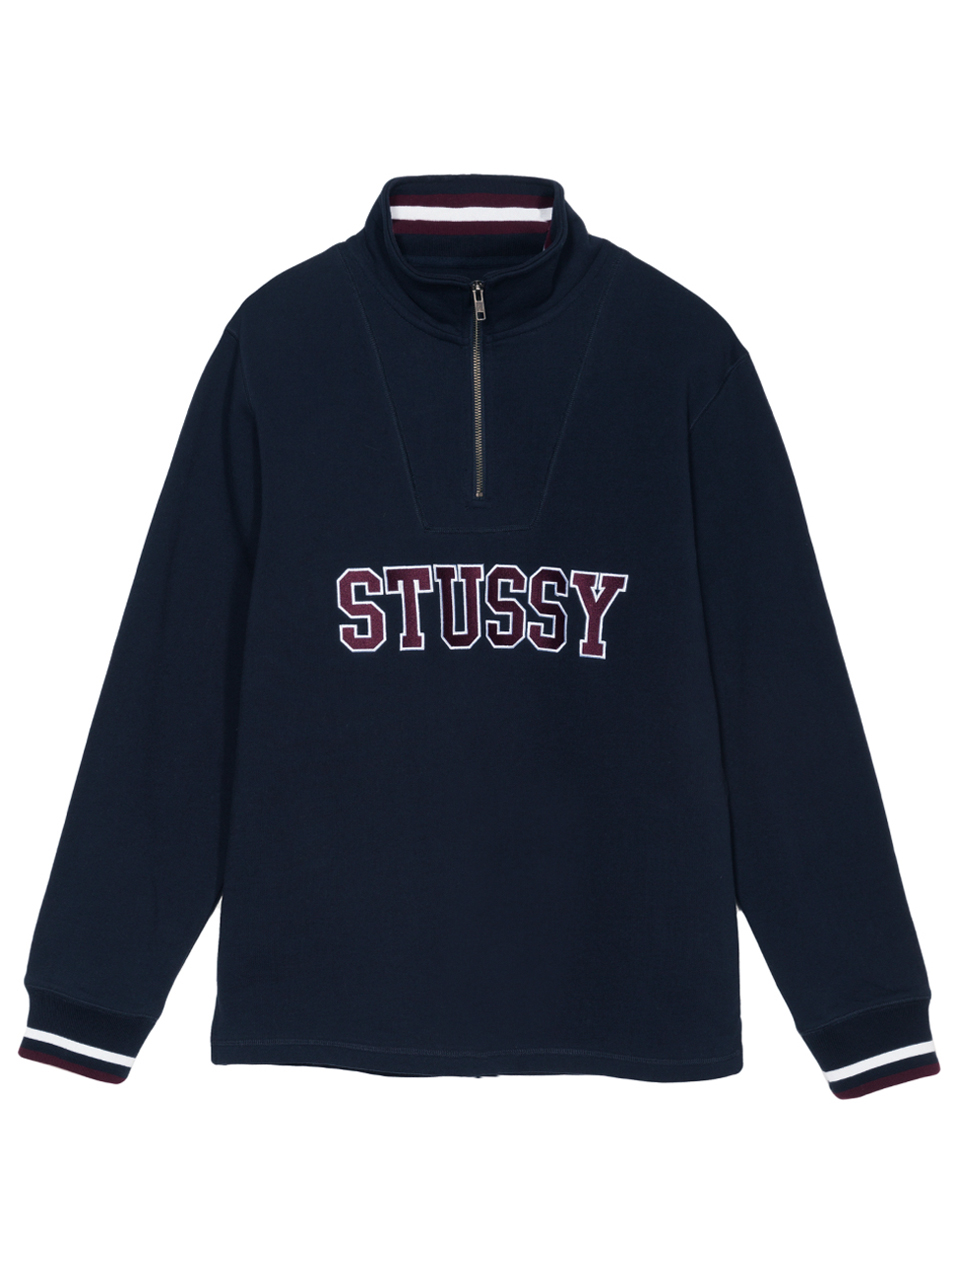 RELAX – (R)evolution » Blog Archive » 11/2 STUSSY 2018FALL&WINTER 